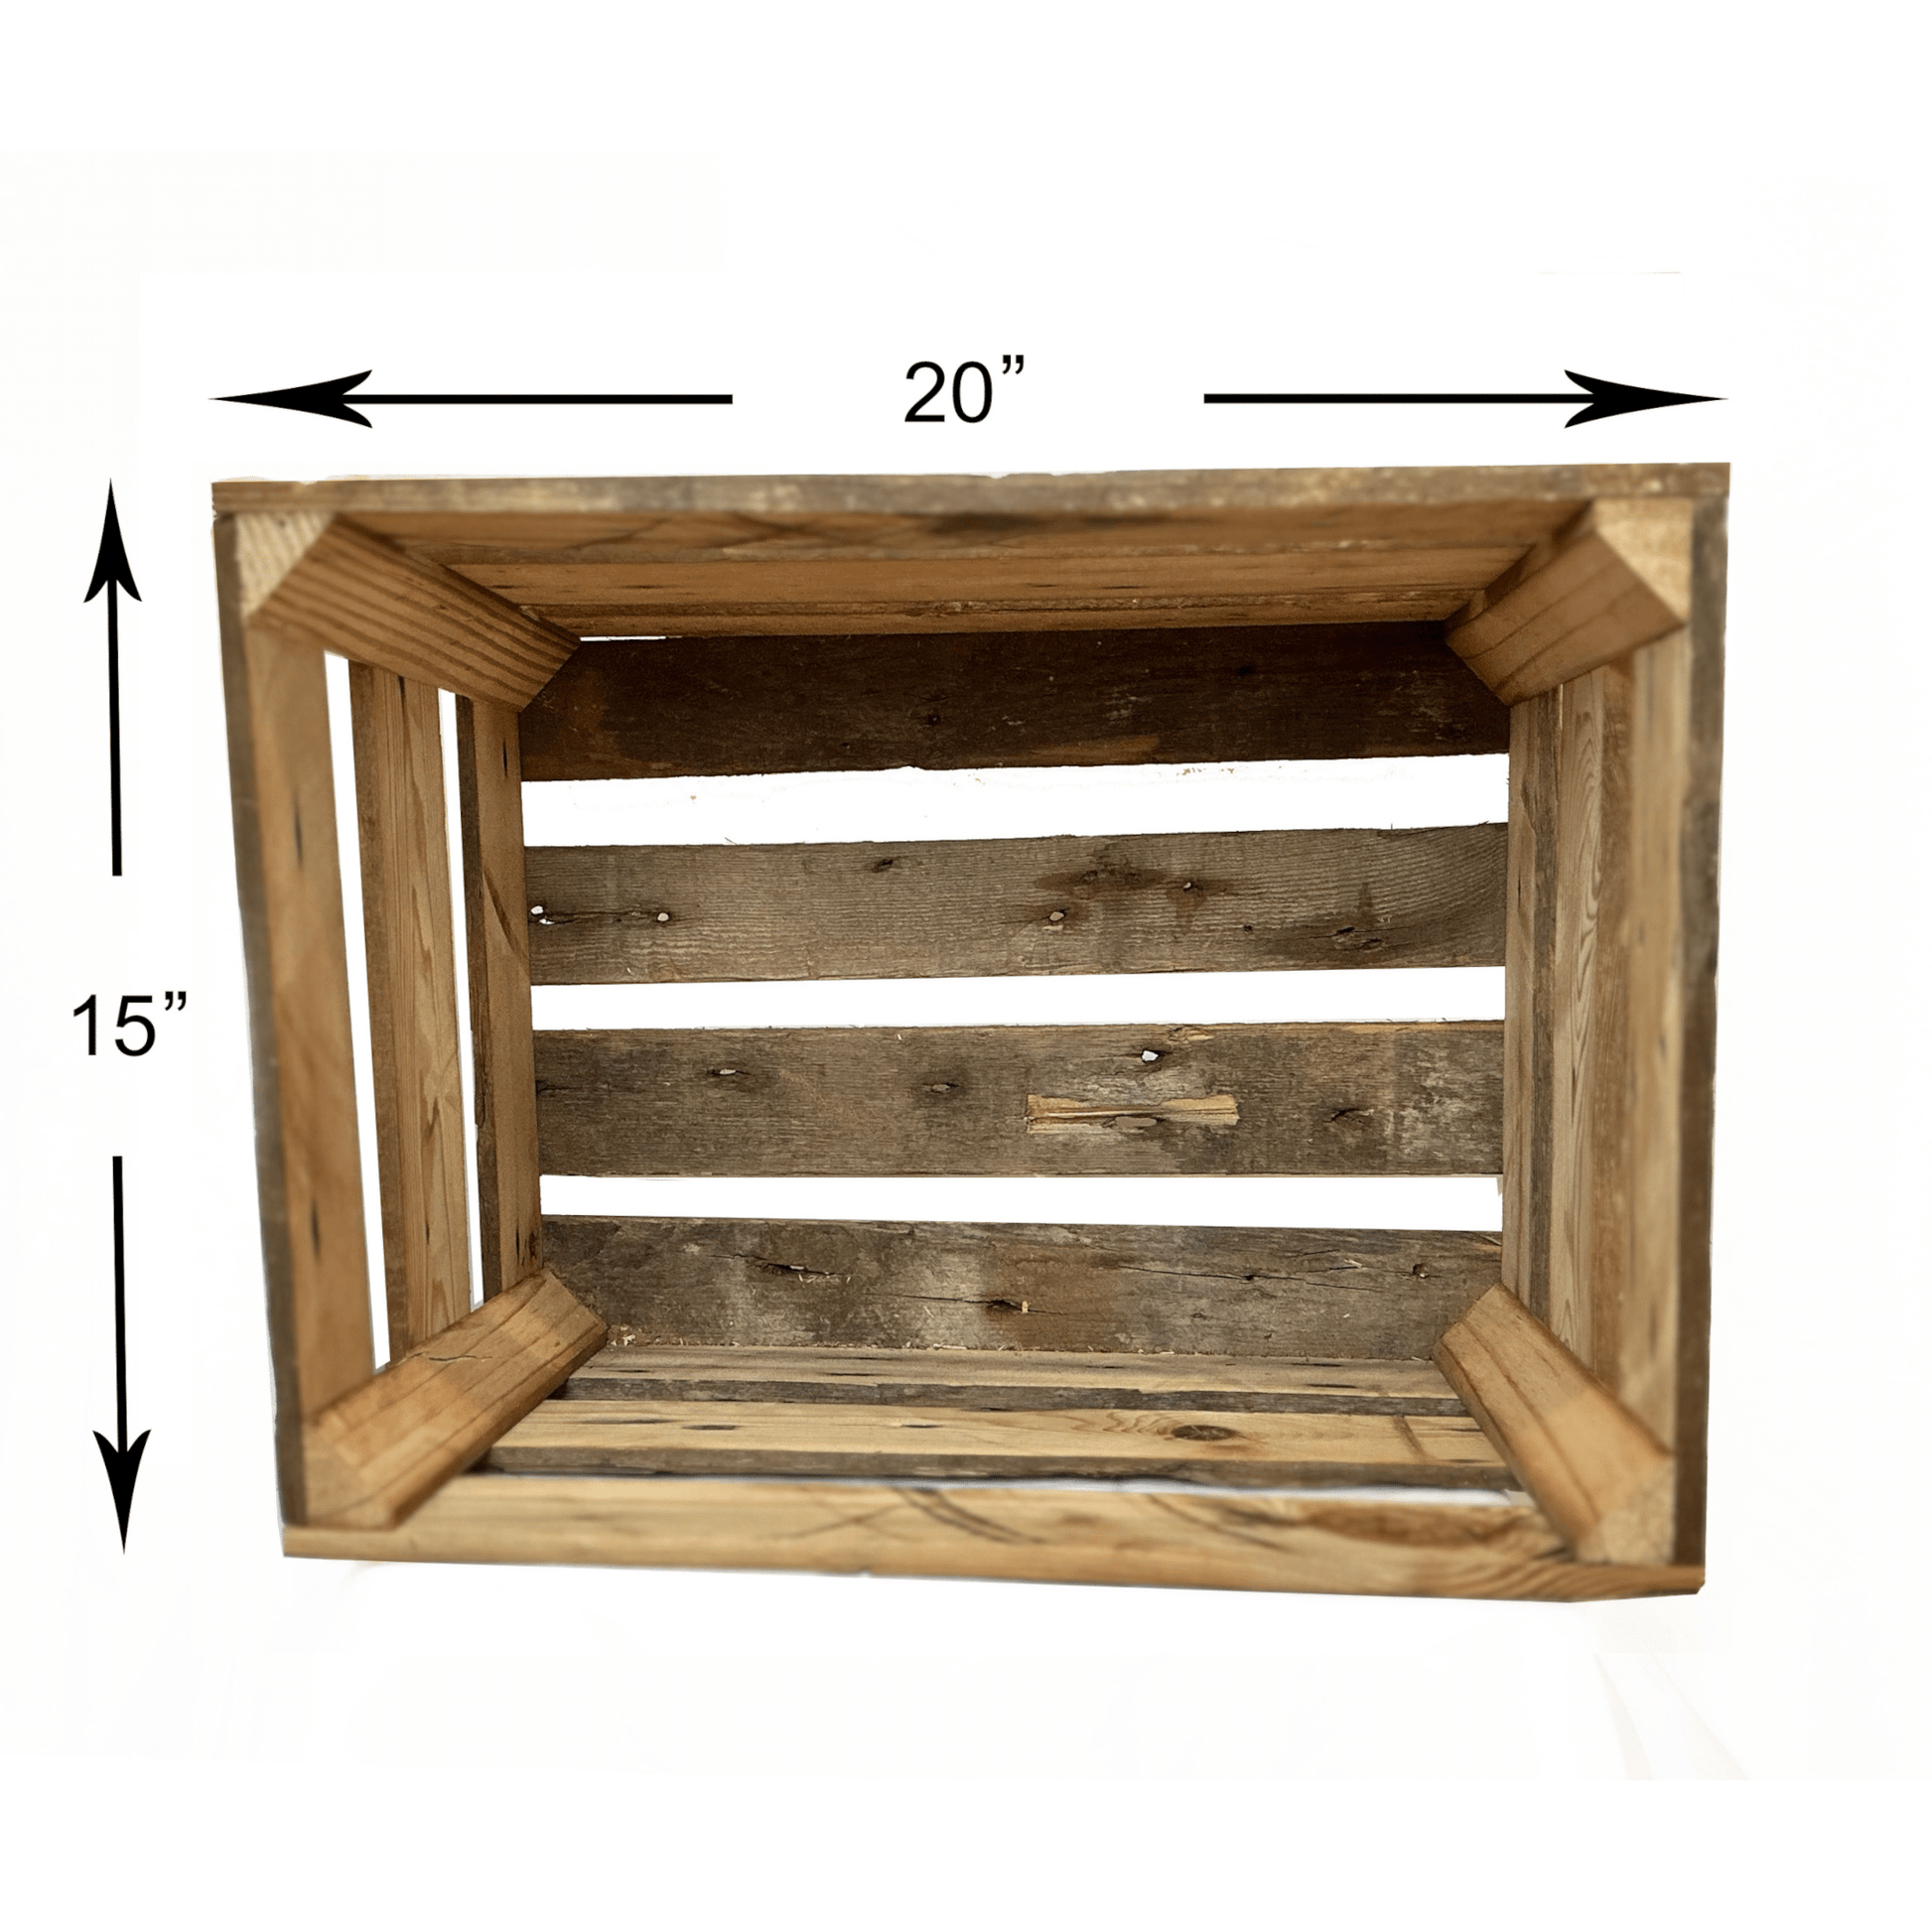 looking inside of a large wooden crate. Text across top shows twenty inches and text down shows fifteen inches. There are four slats across the bottom with spaces in between. Each corner has a support.